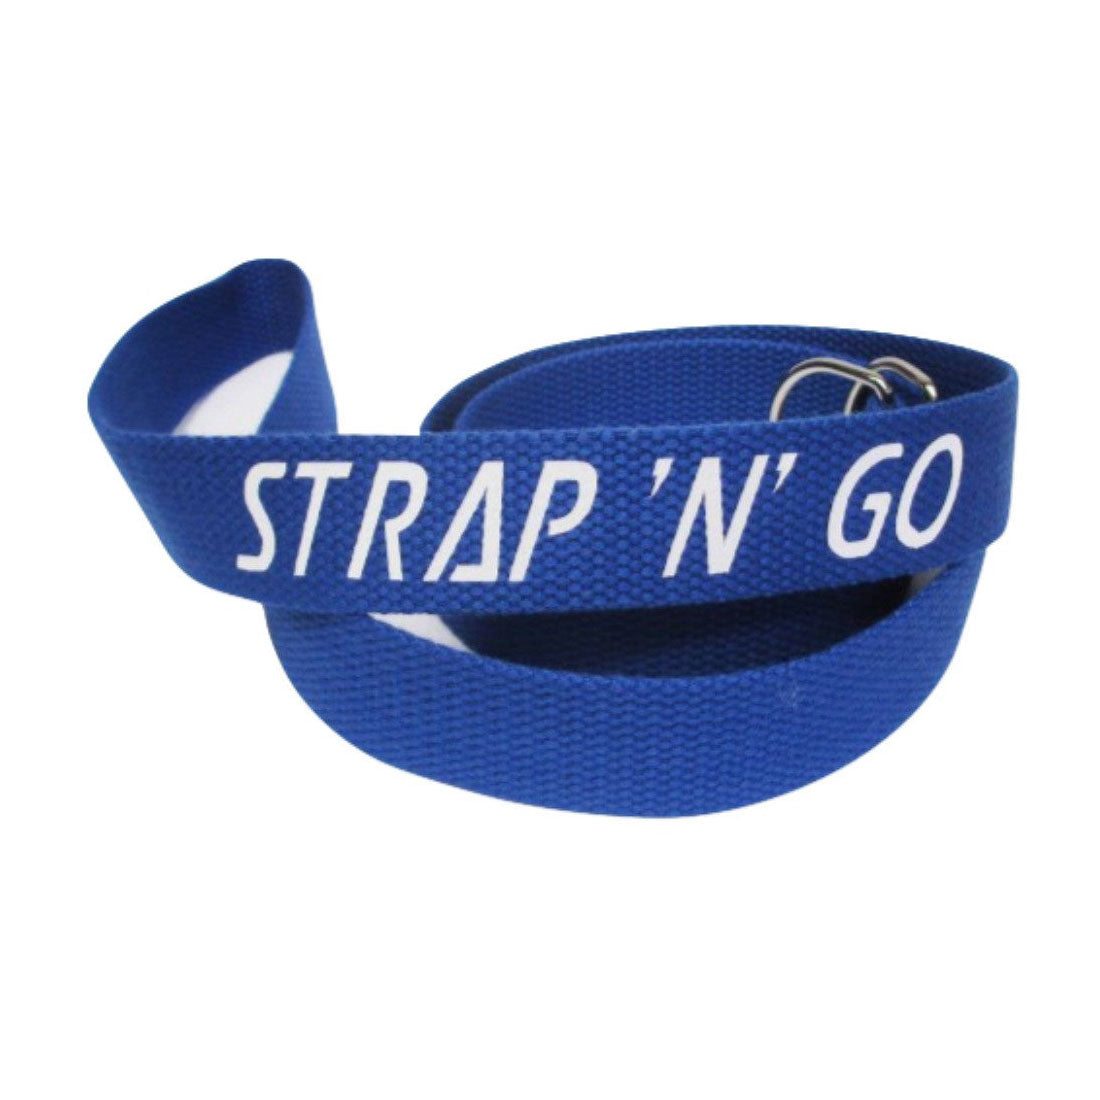 Strap N Go Skate Noose/Leash - Solid Colours Midnight Blue Roller Skate Accessories